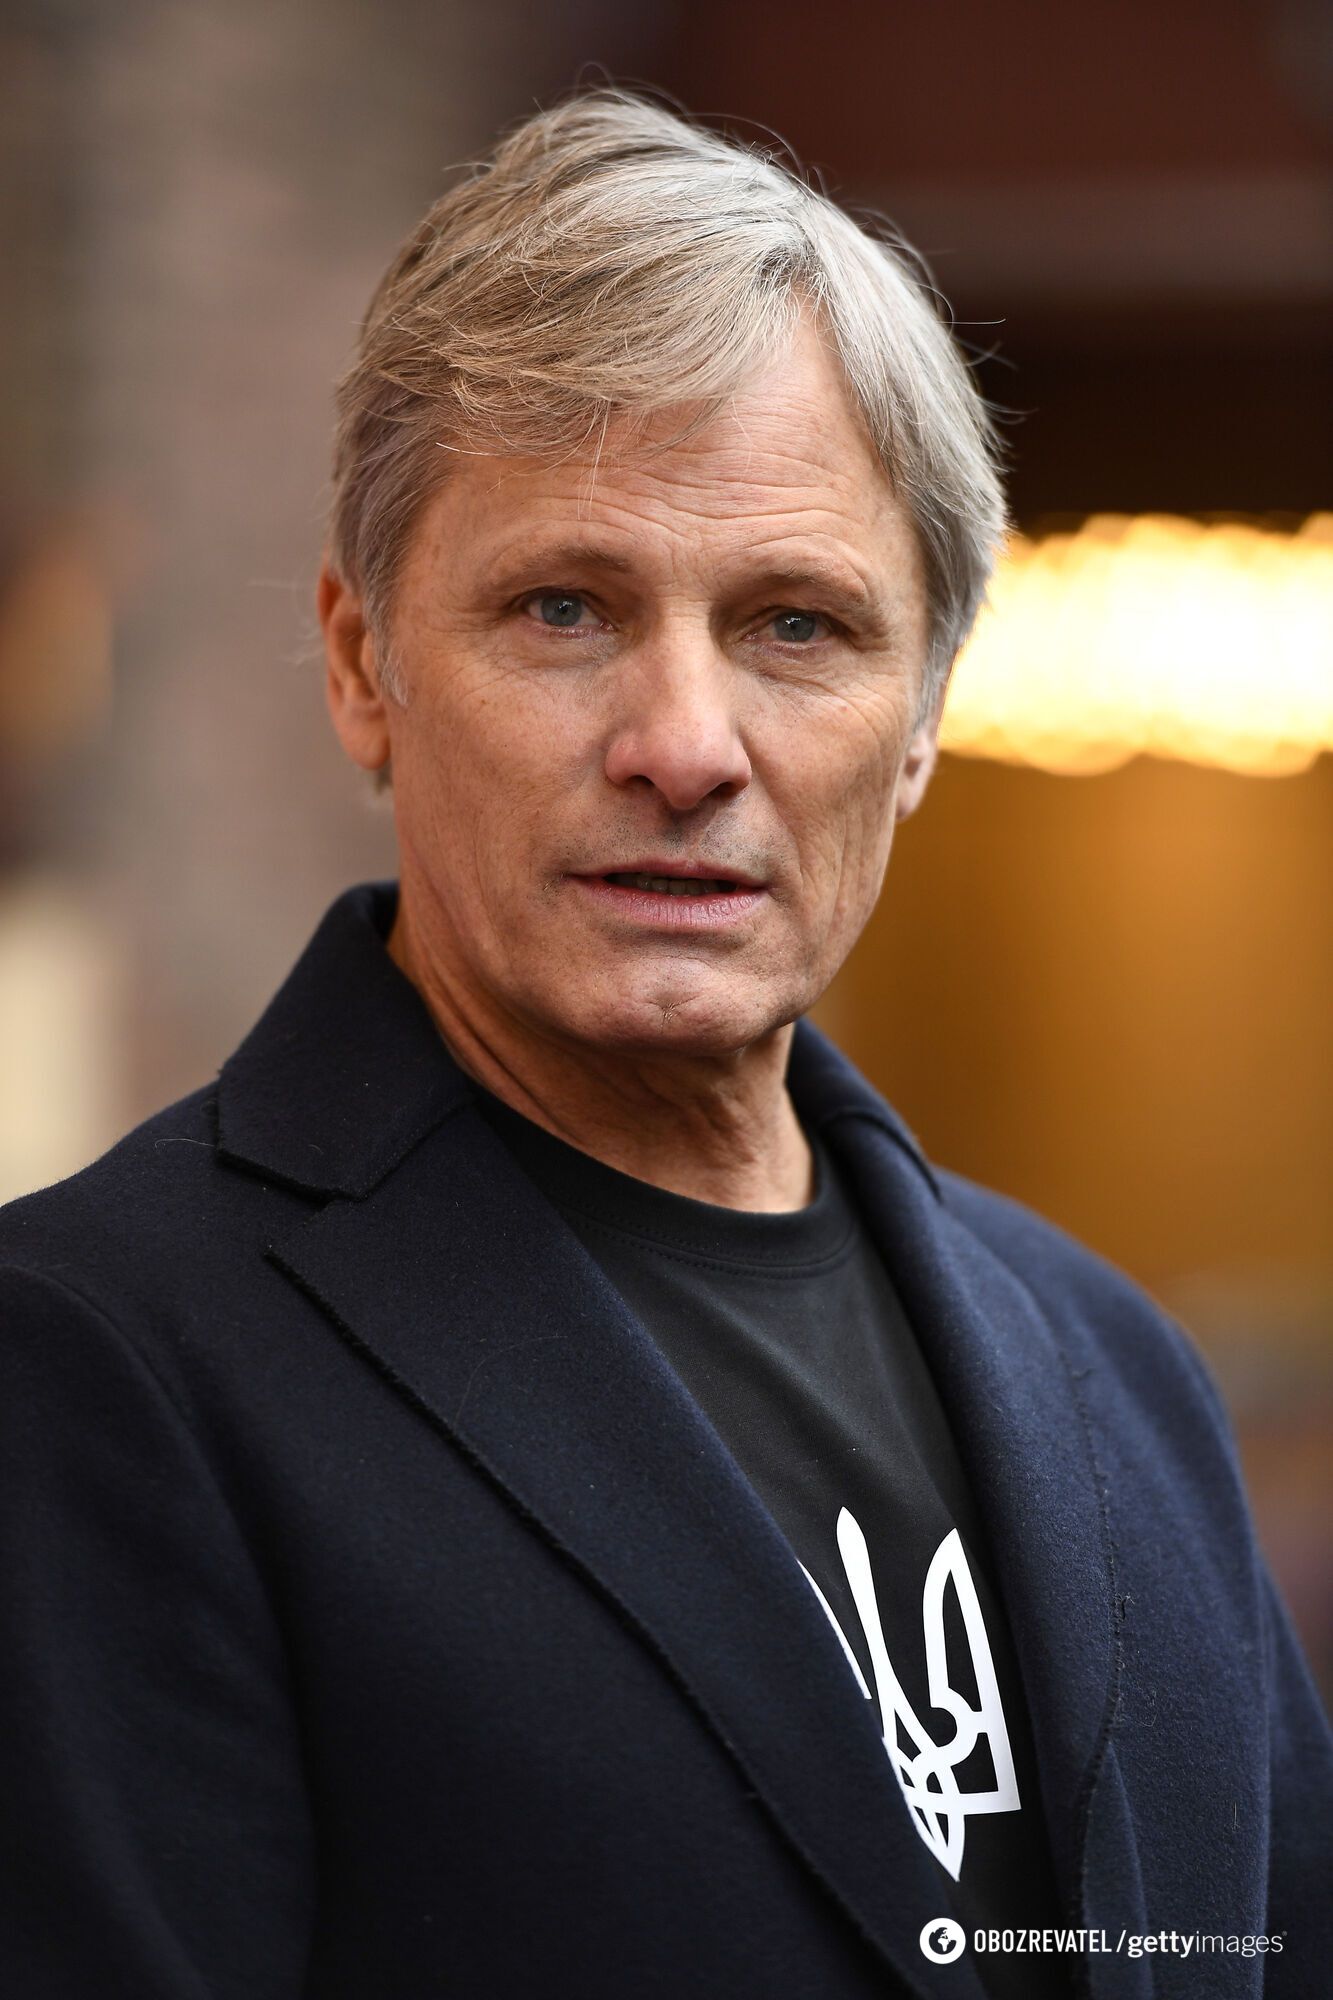 With a trident on his T-shirt. The Lord of the Rings star Viggo Mortensen calls Putin a barbarian and declares support for Ukraine